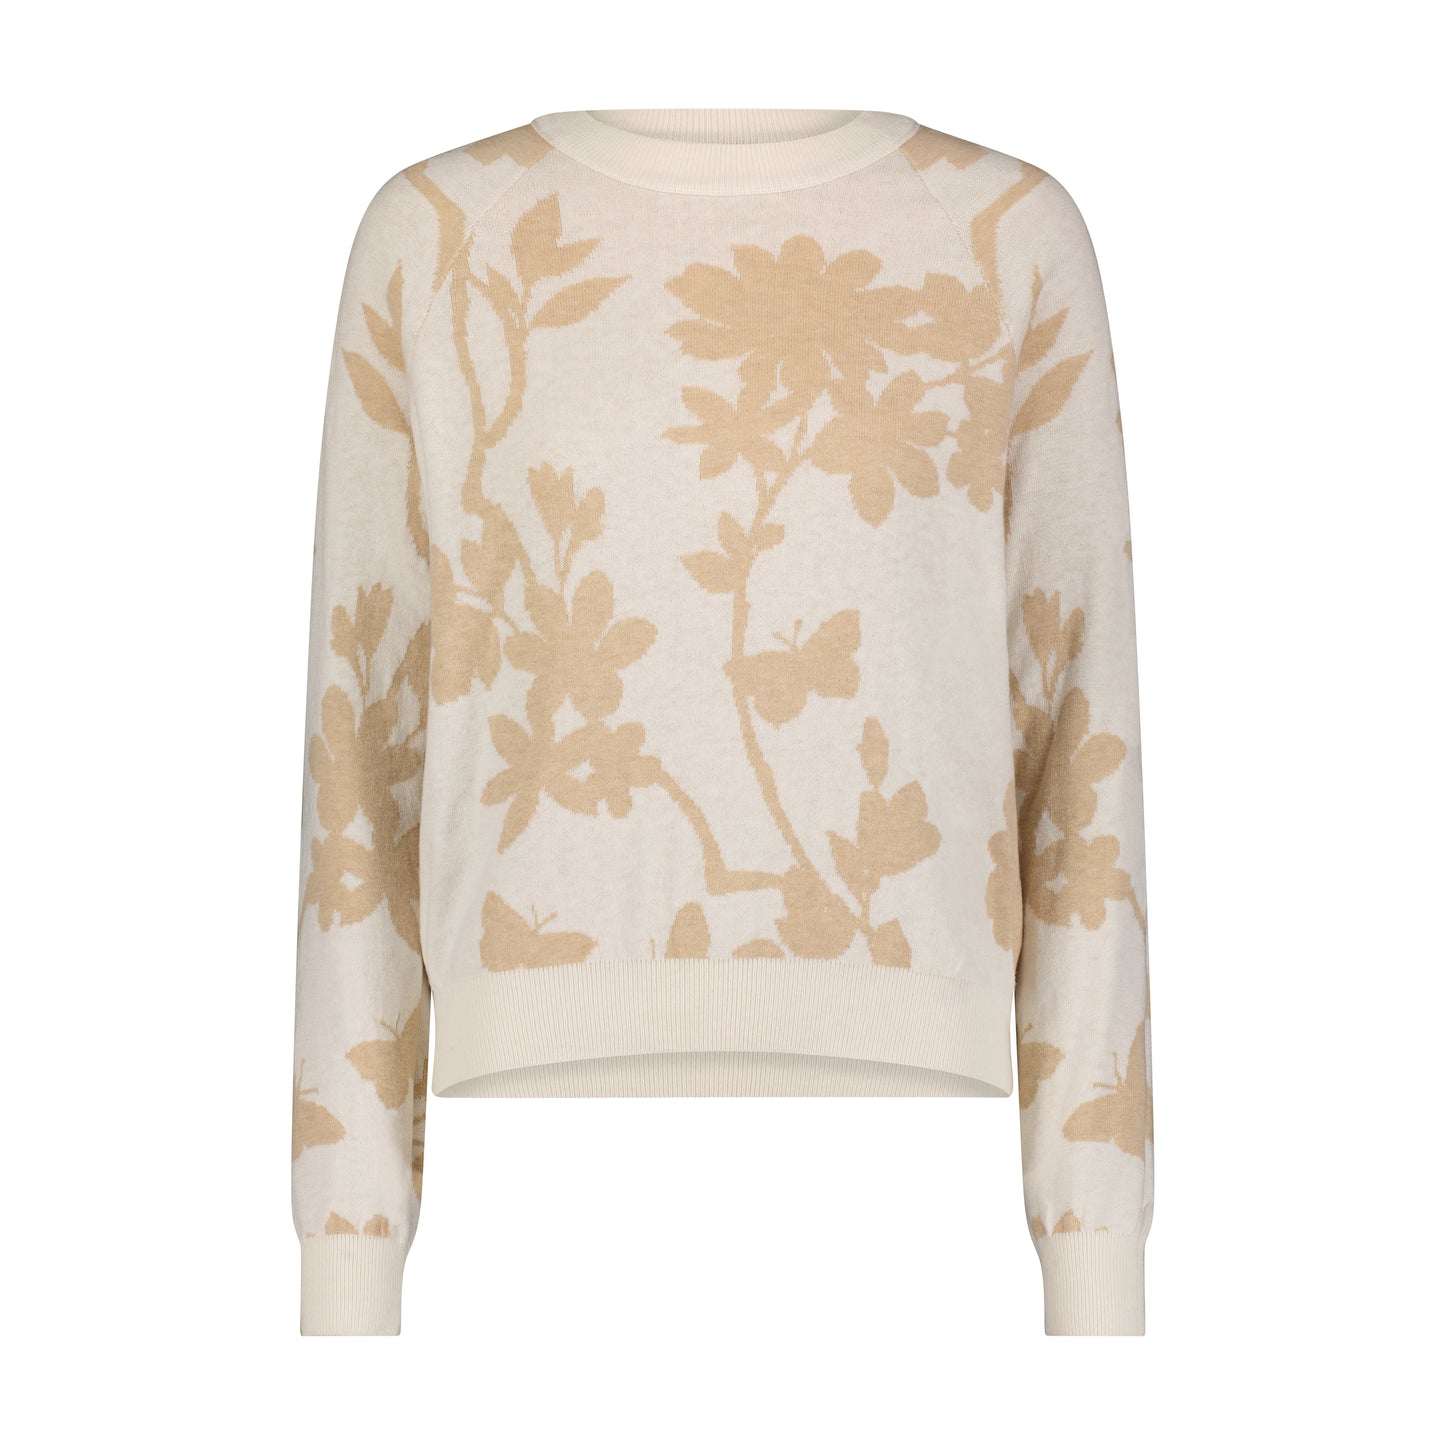 Minnie Rose - Cotton Cashmere 3/4 Sleeve Reversible Floral Crew